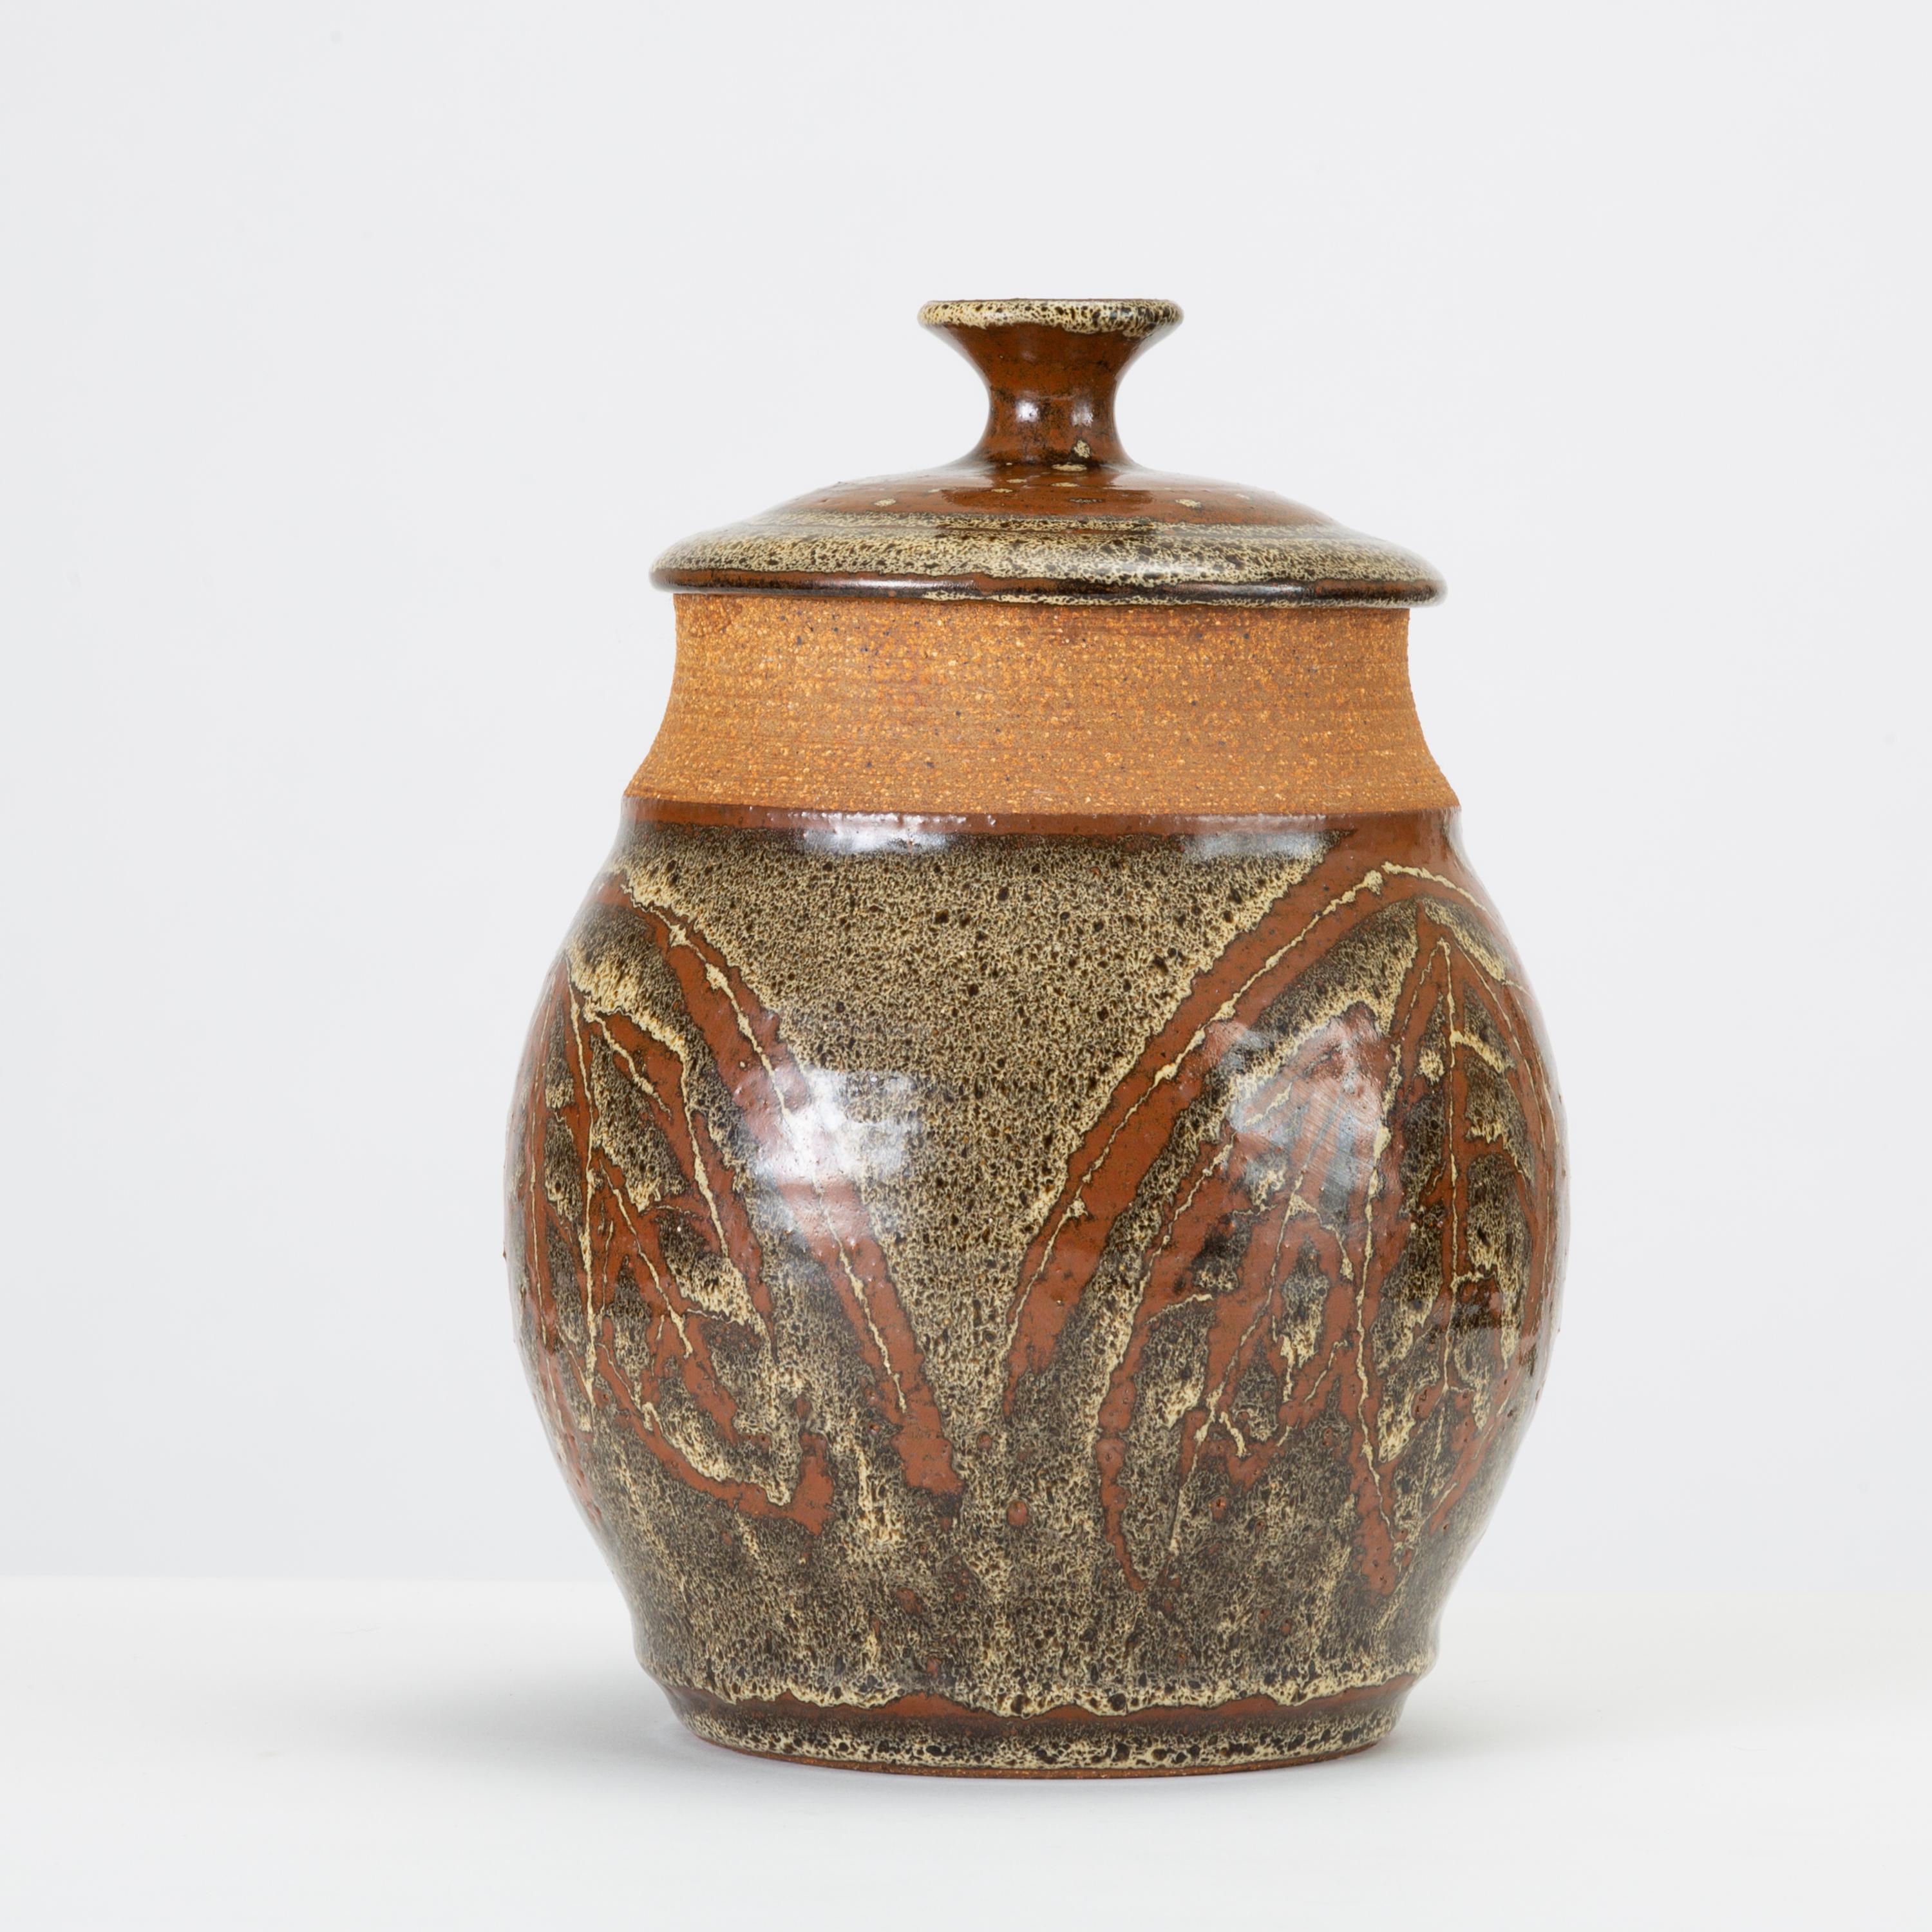 Don Jennings, a prominent local ceramicist based in Orange County, California, worked as an instructor and artist throughout the 1960s and 1970s. This example is a wheel-thrown ceramic lidded jar with a painted leaf pattern in high-gloss glaze - a